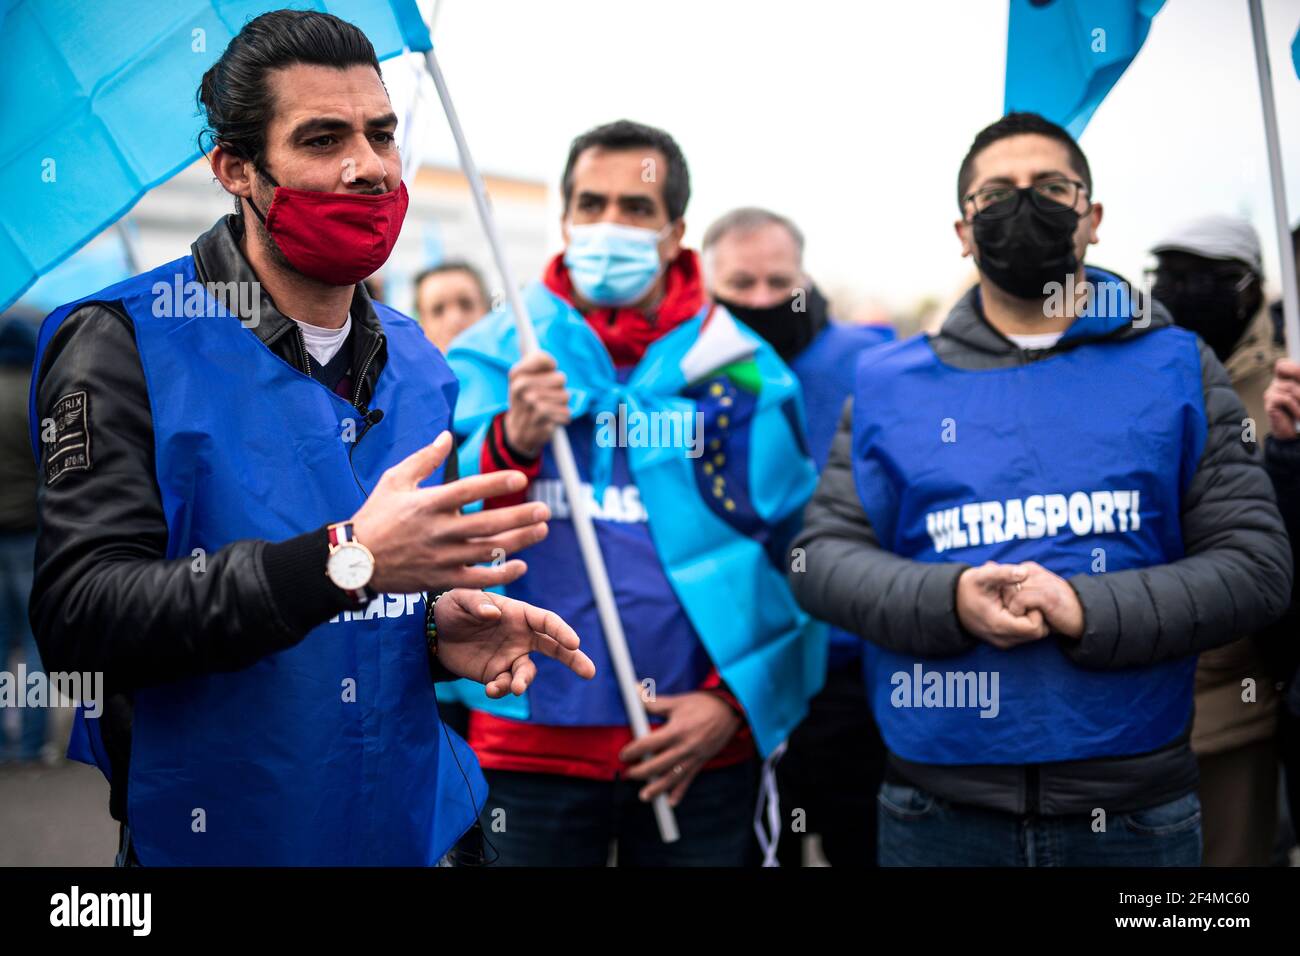 Brandizzo, Italy - 22 March, 2021: Amazon's employees of 'Uiltrasporti' trade union are seen during a demonstration for better working conditions in front of the Amazon distribution centre in Brandizzo. Trade unions said that 9,500 warehouse workers and 15,000 drivers were on strike in Italy. Credit: Nicolò Campo/Alamy Live News Stock Photo